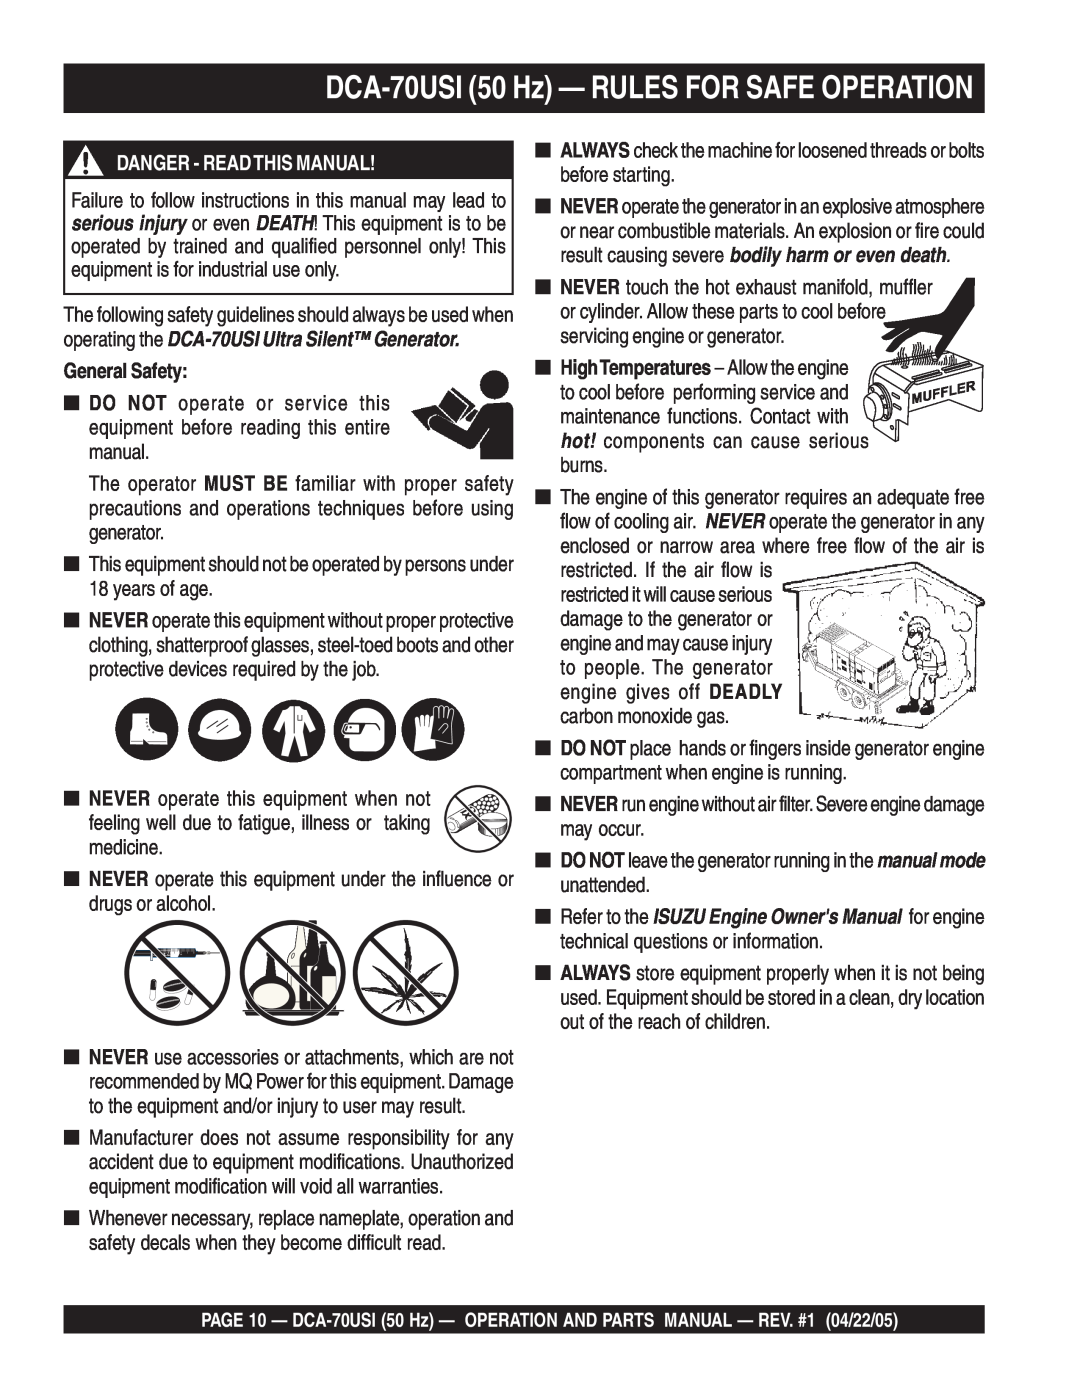 Multiquip operation manual DCA-70USI50 Hz — RULES FOR SAFE OPERATION, Danger - Readthis Manual, General Safety 